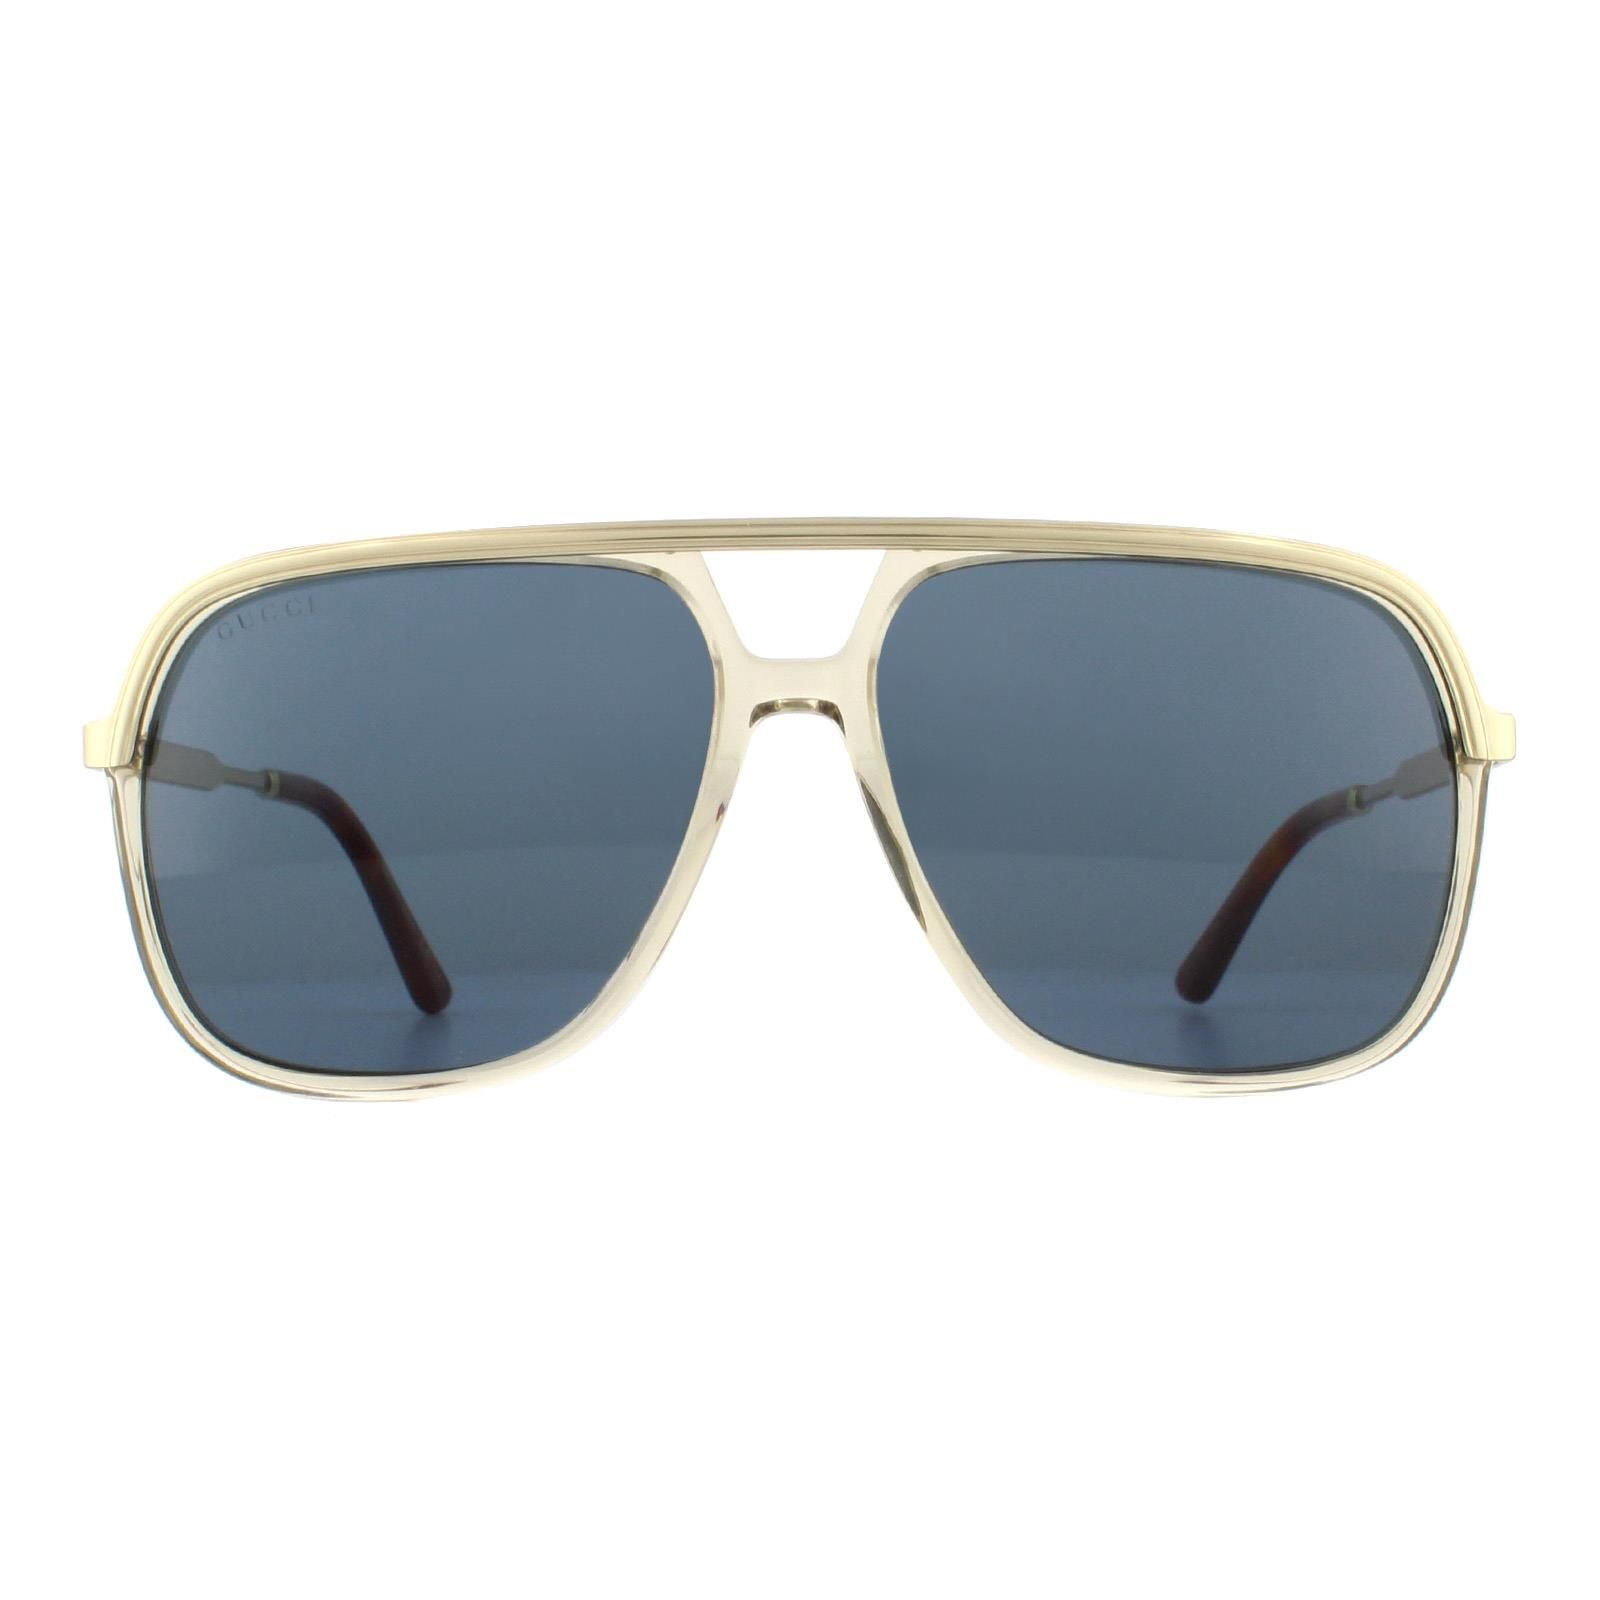 Gucci Sunglasses GG0200S 004 Gold with Light Brown Crystal Blue